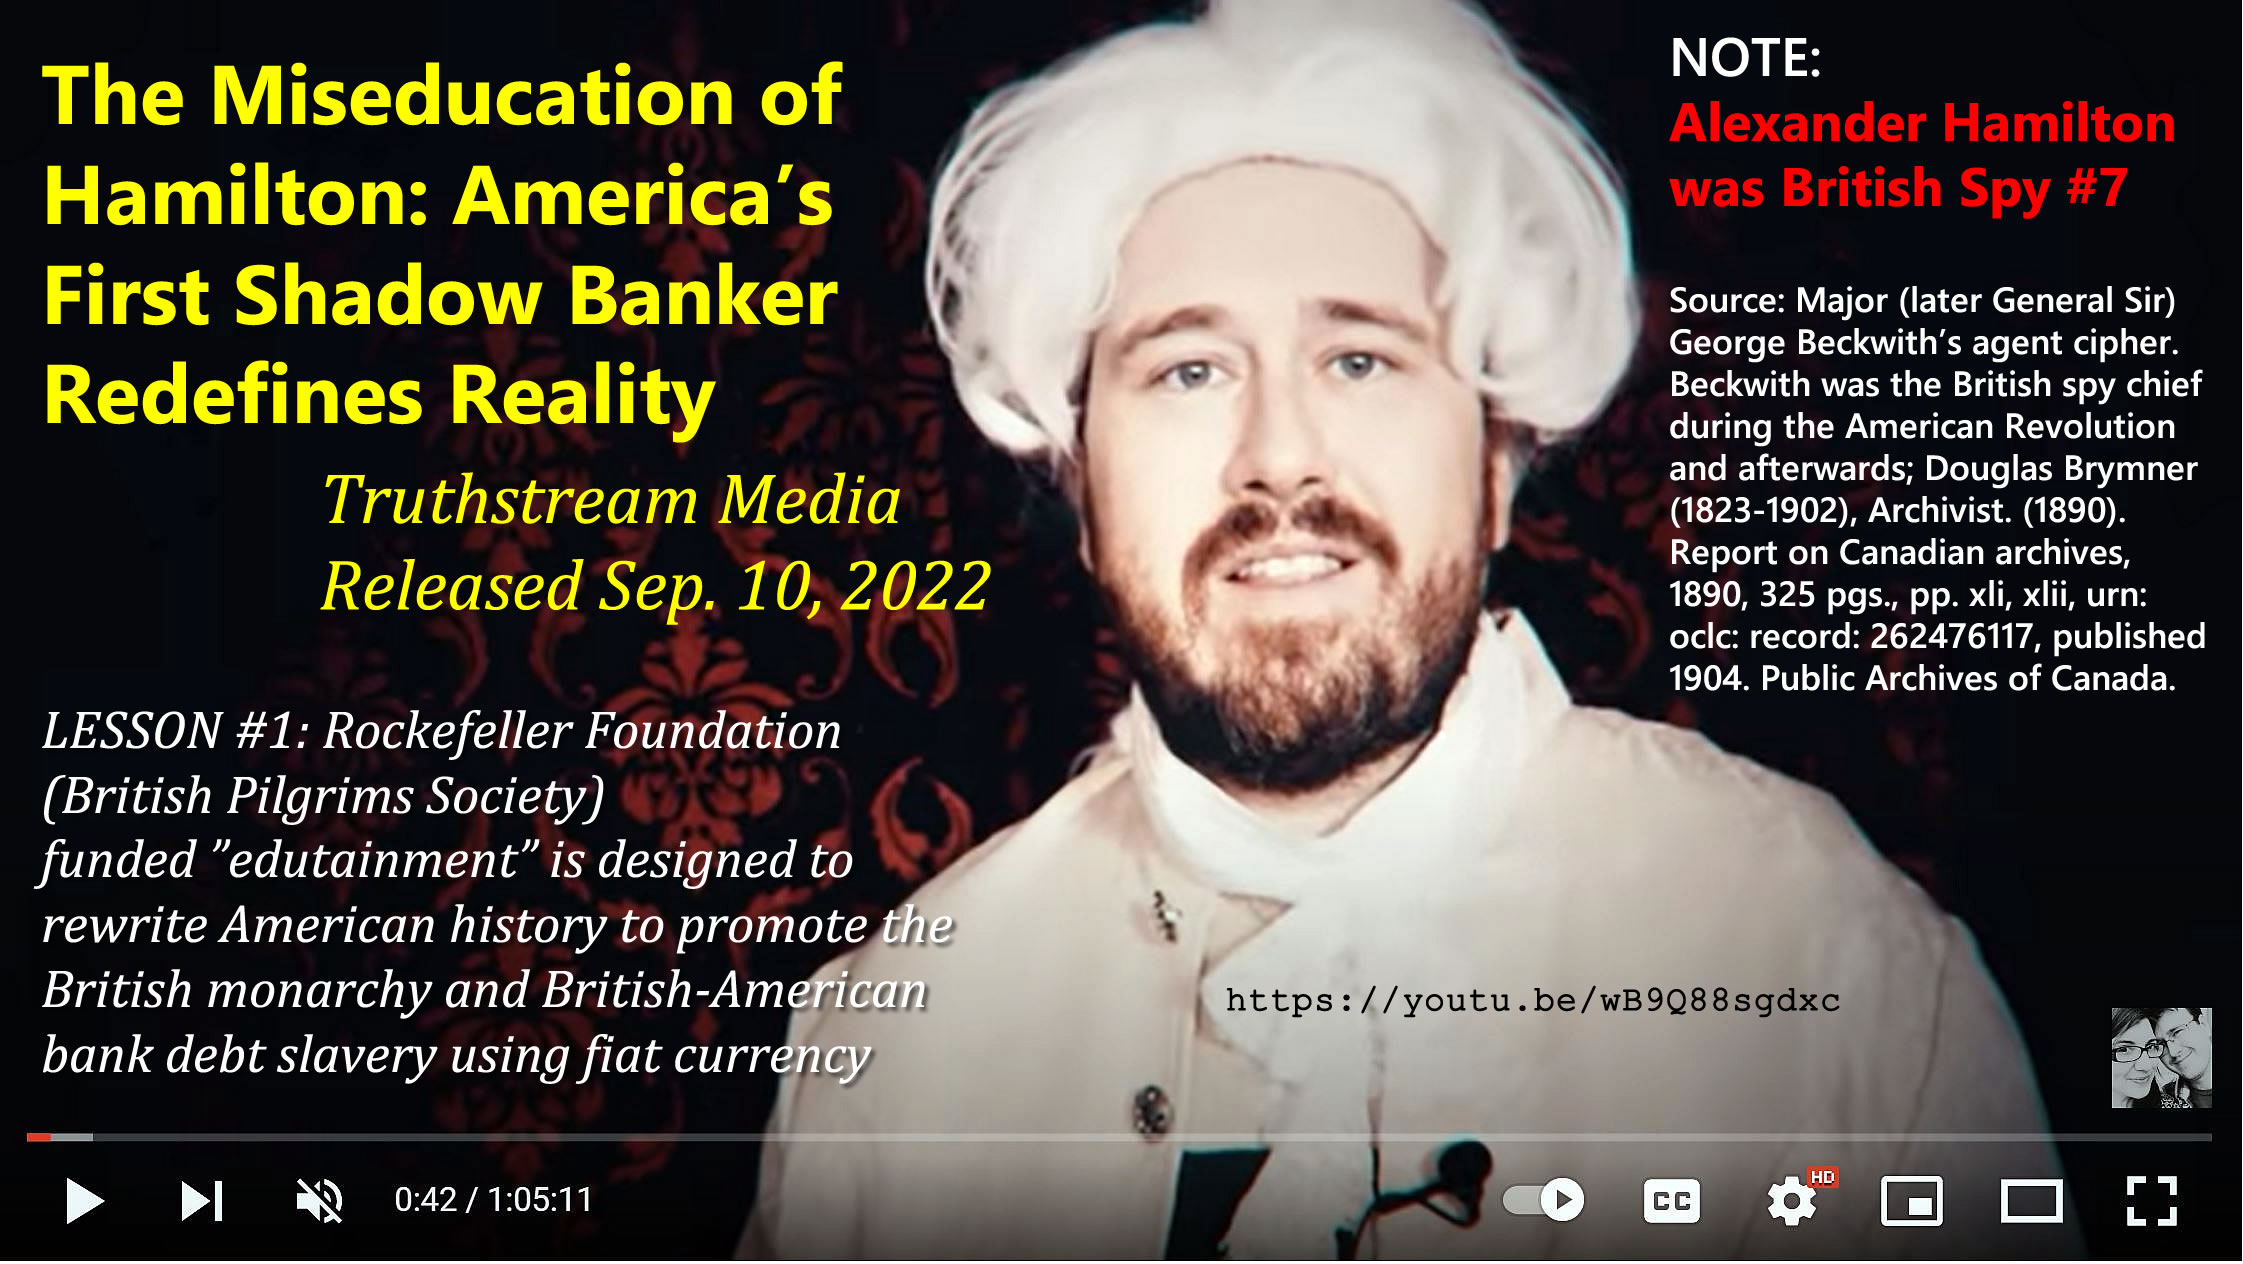 Morris. (Sep. 10, 2022). The Miseducation of Hamilton: America's First Shadow Banker Redefines Reality. Truthstream Media.